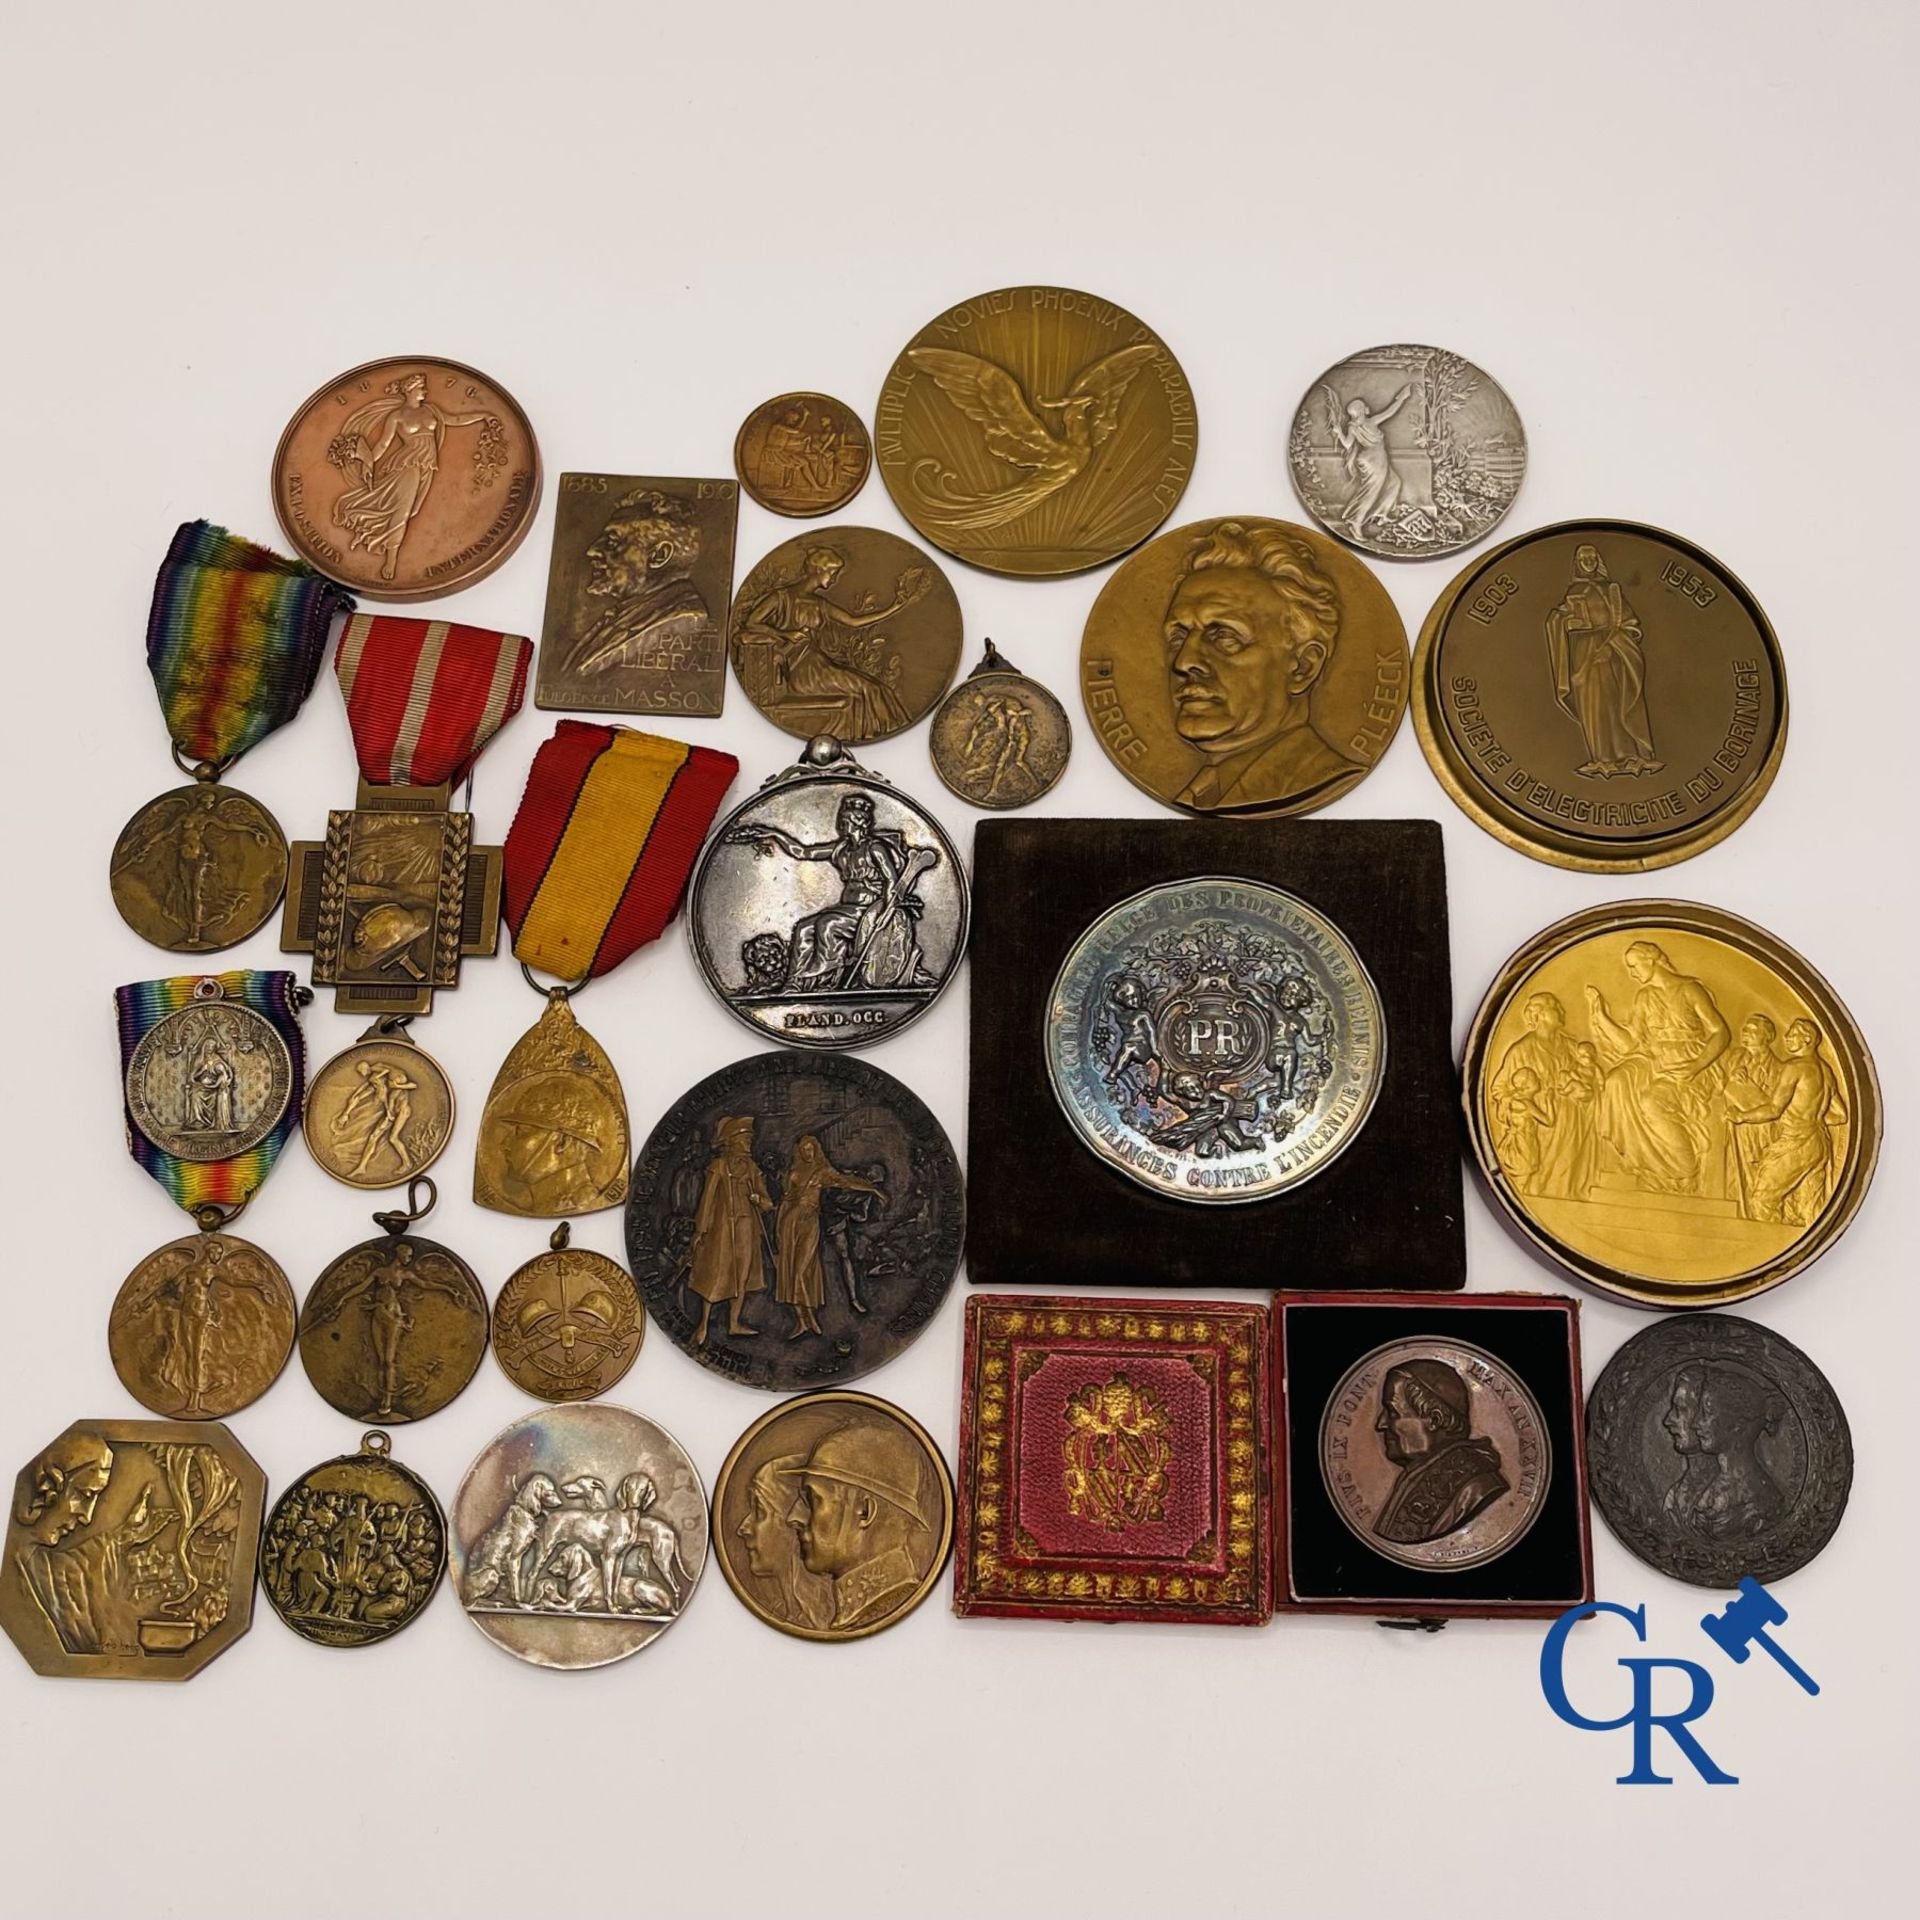 Commemorative Medals: Large lot of different medals and decorations.